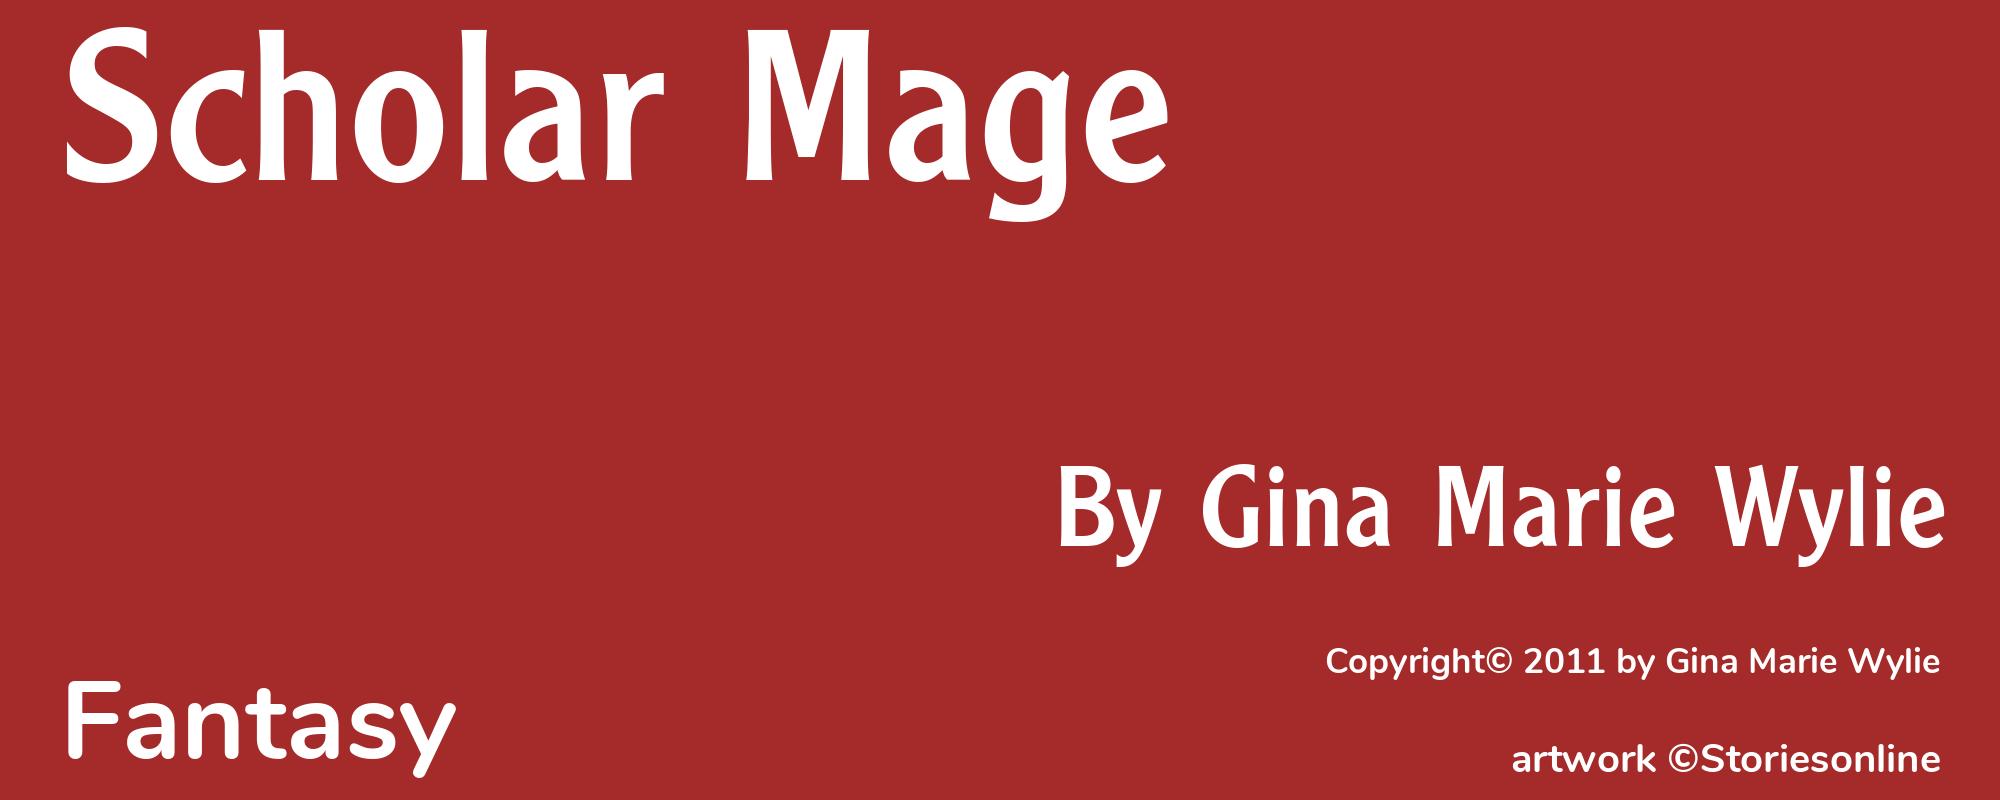 Scholar Mage - Cover